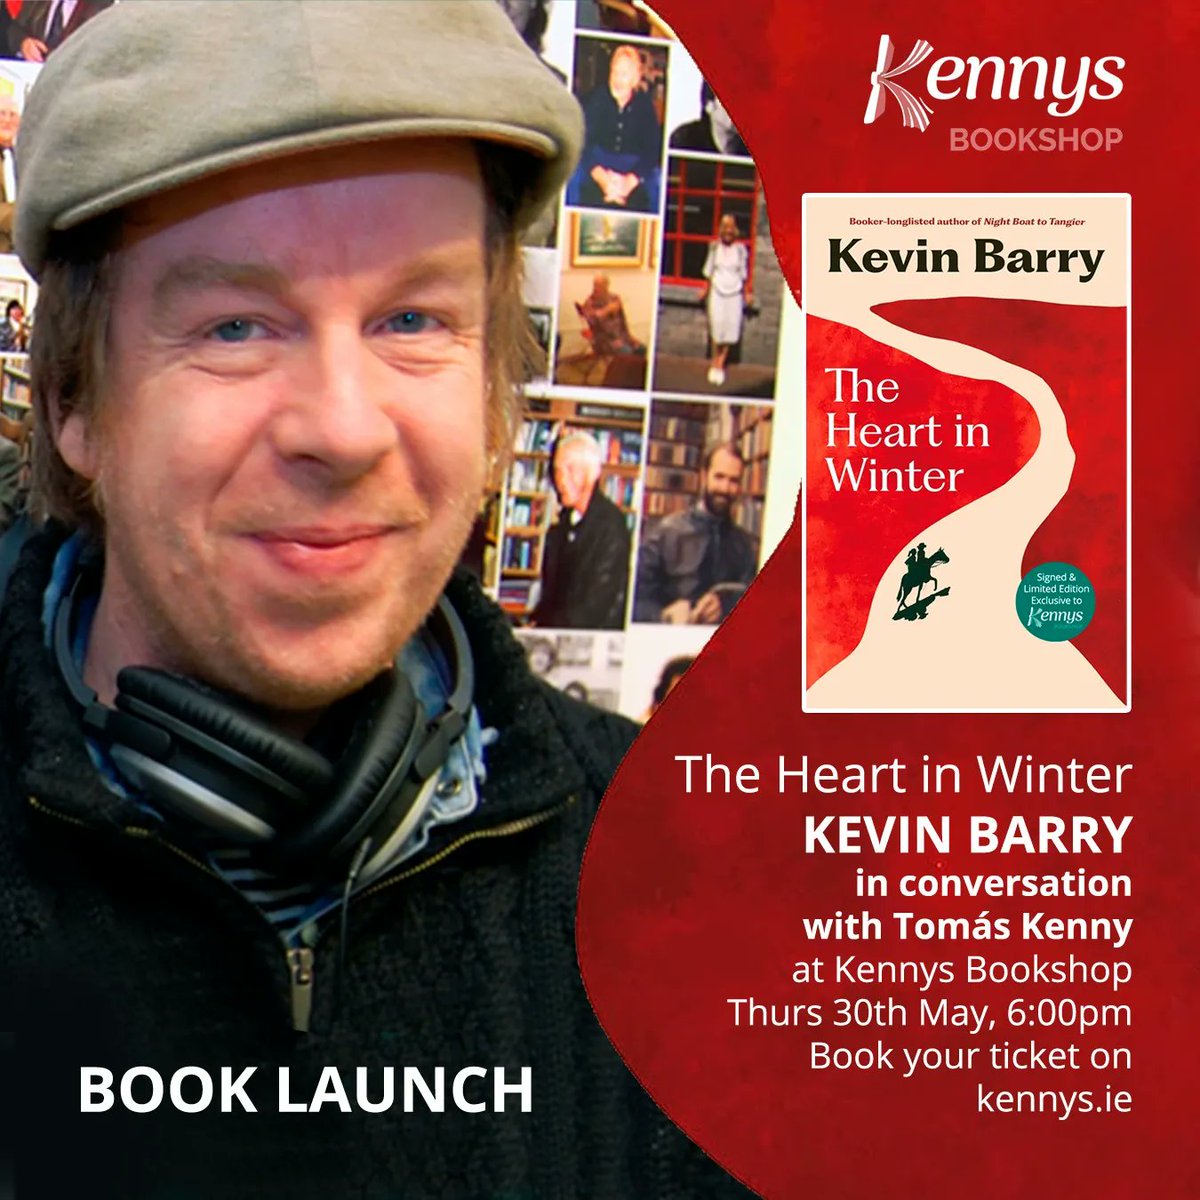 The brilliant Kevin Barry will be in Kennys Bookshop for an event on Thursday, May 30th! He will join Tomás Kenny in conversation about his new novel, The Heart in Winter, a tale of a forbidden affair set in 1890s Montana. Tickets are free but limited. > eventbrite.ie/e/kevin-barry-…